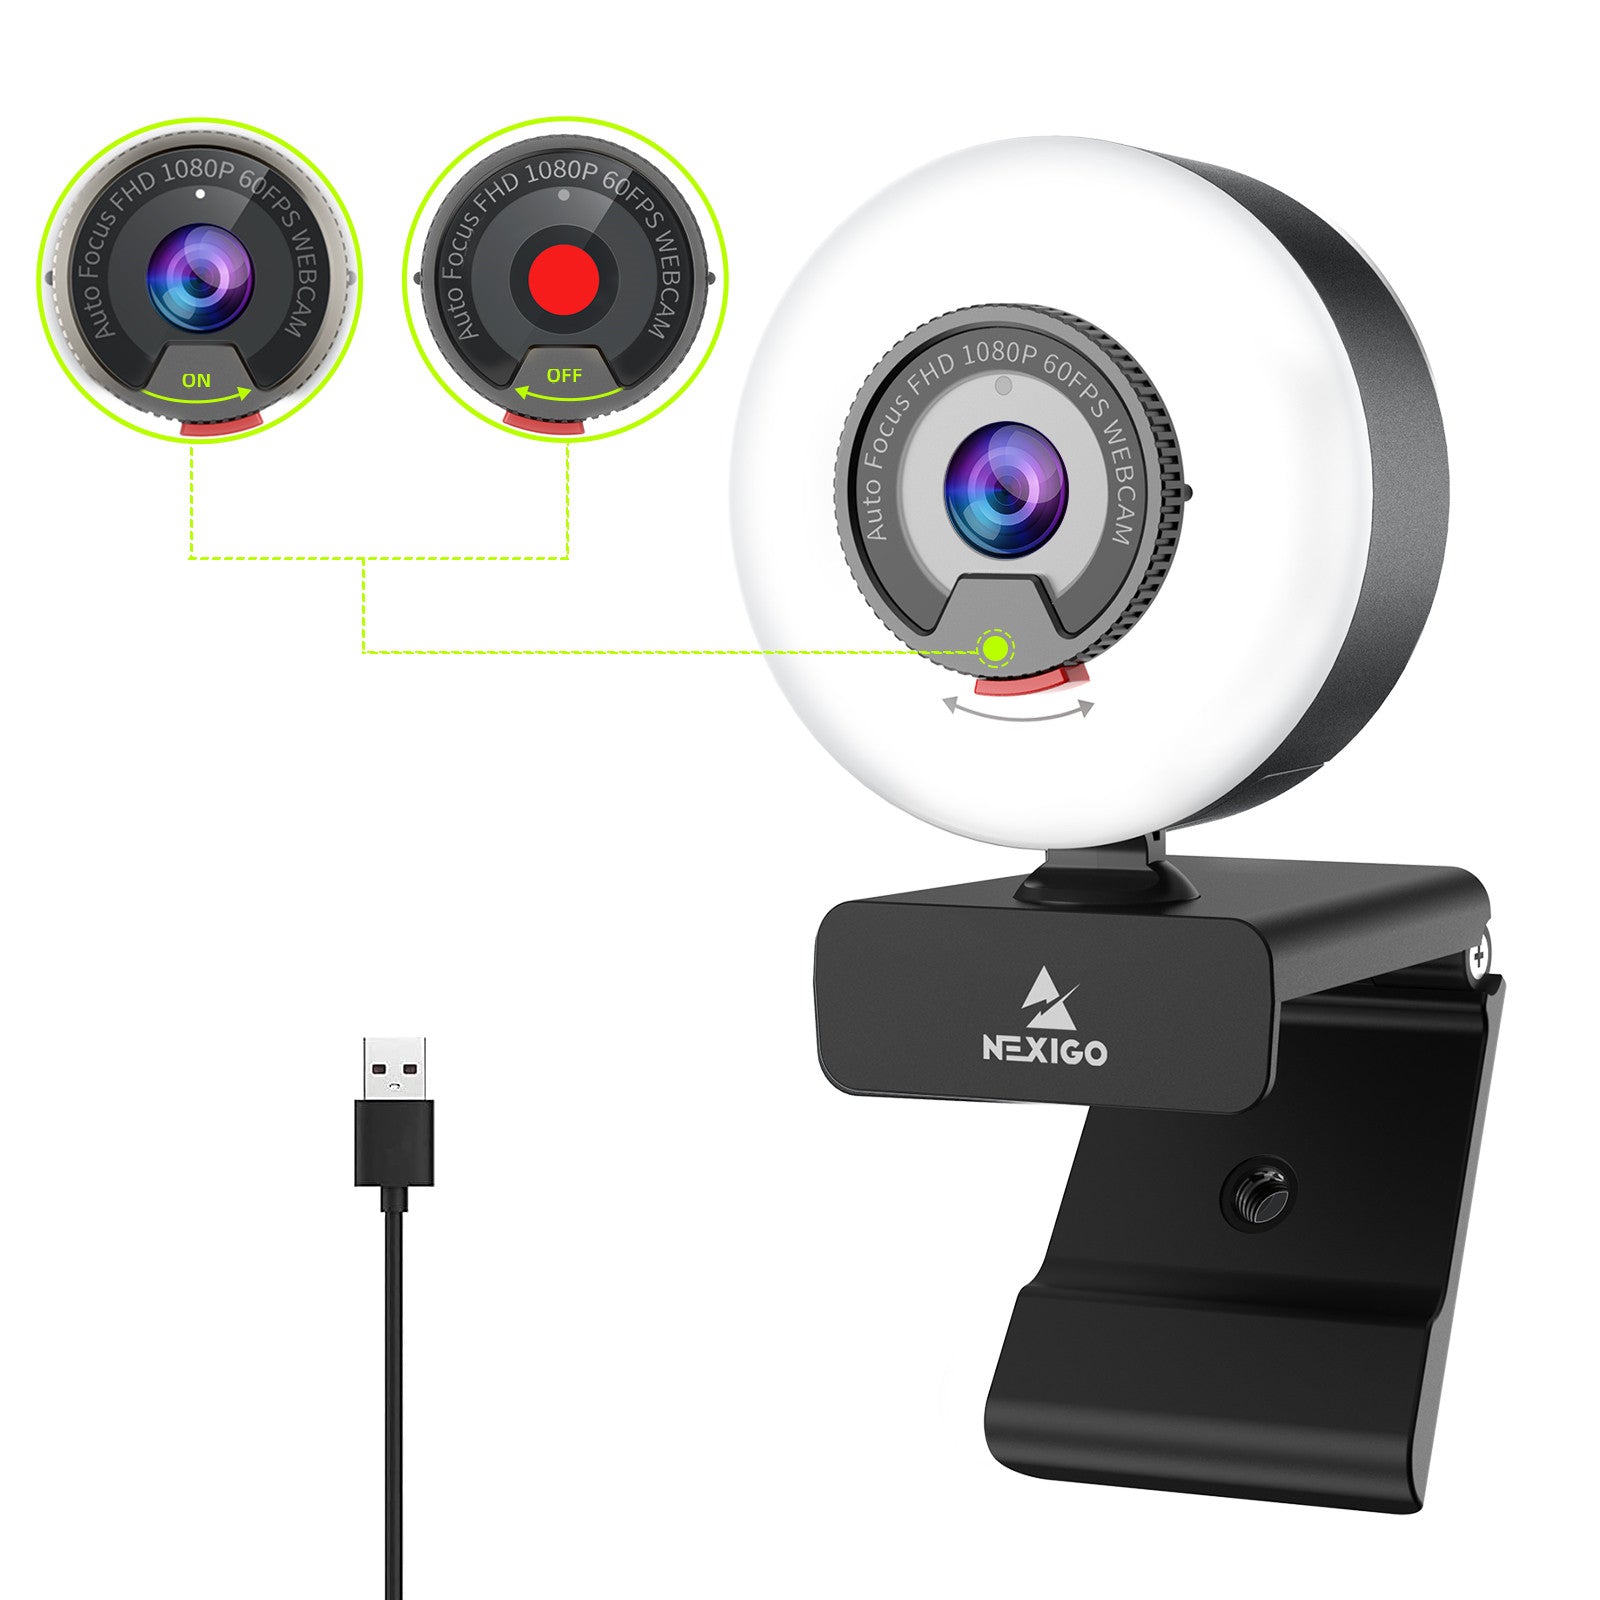 N960E webcam with light adjustment and built-in privacy cover.